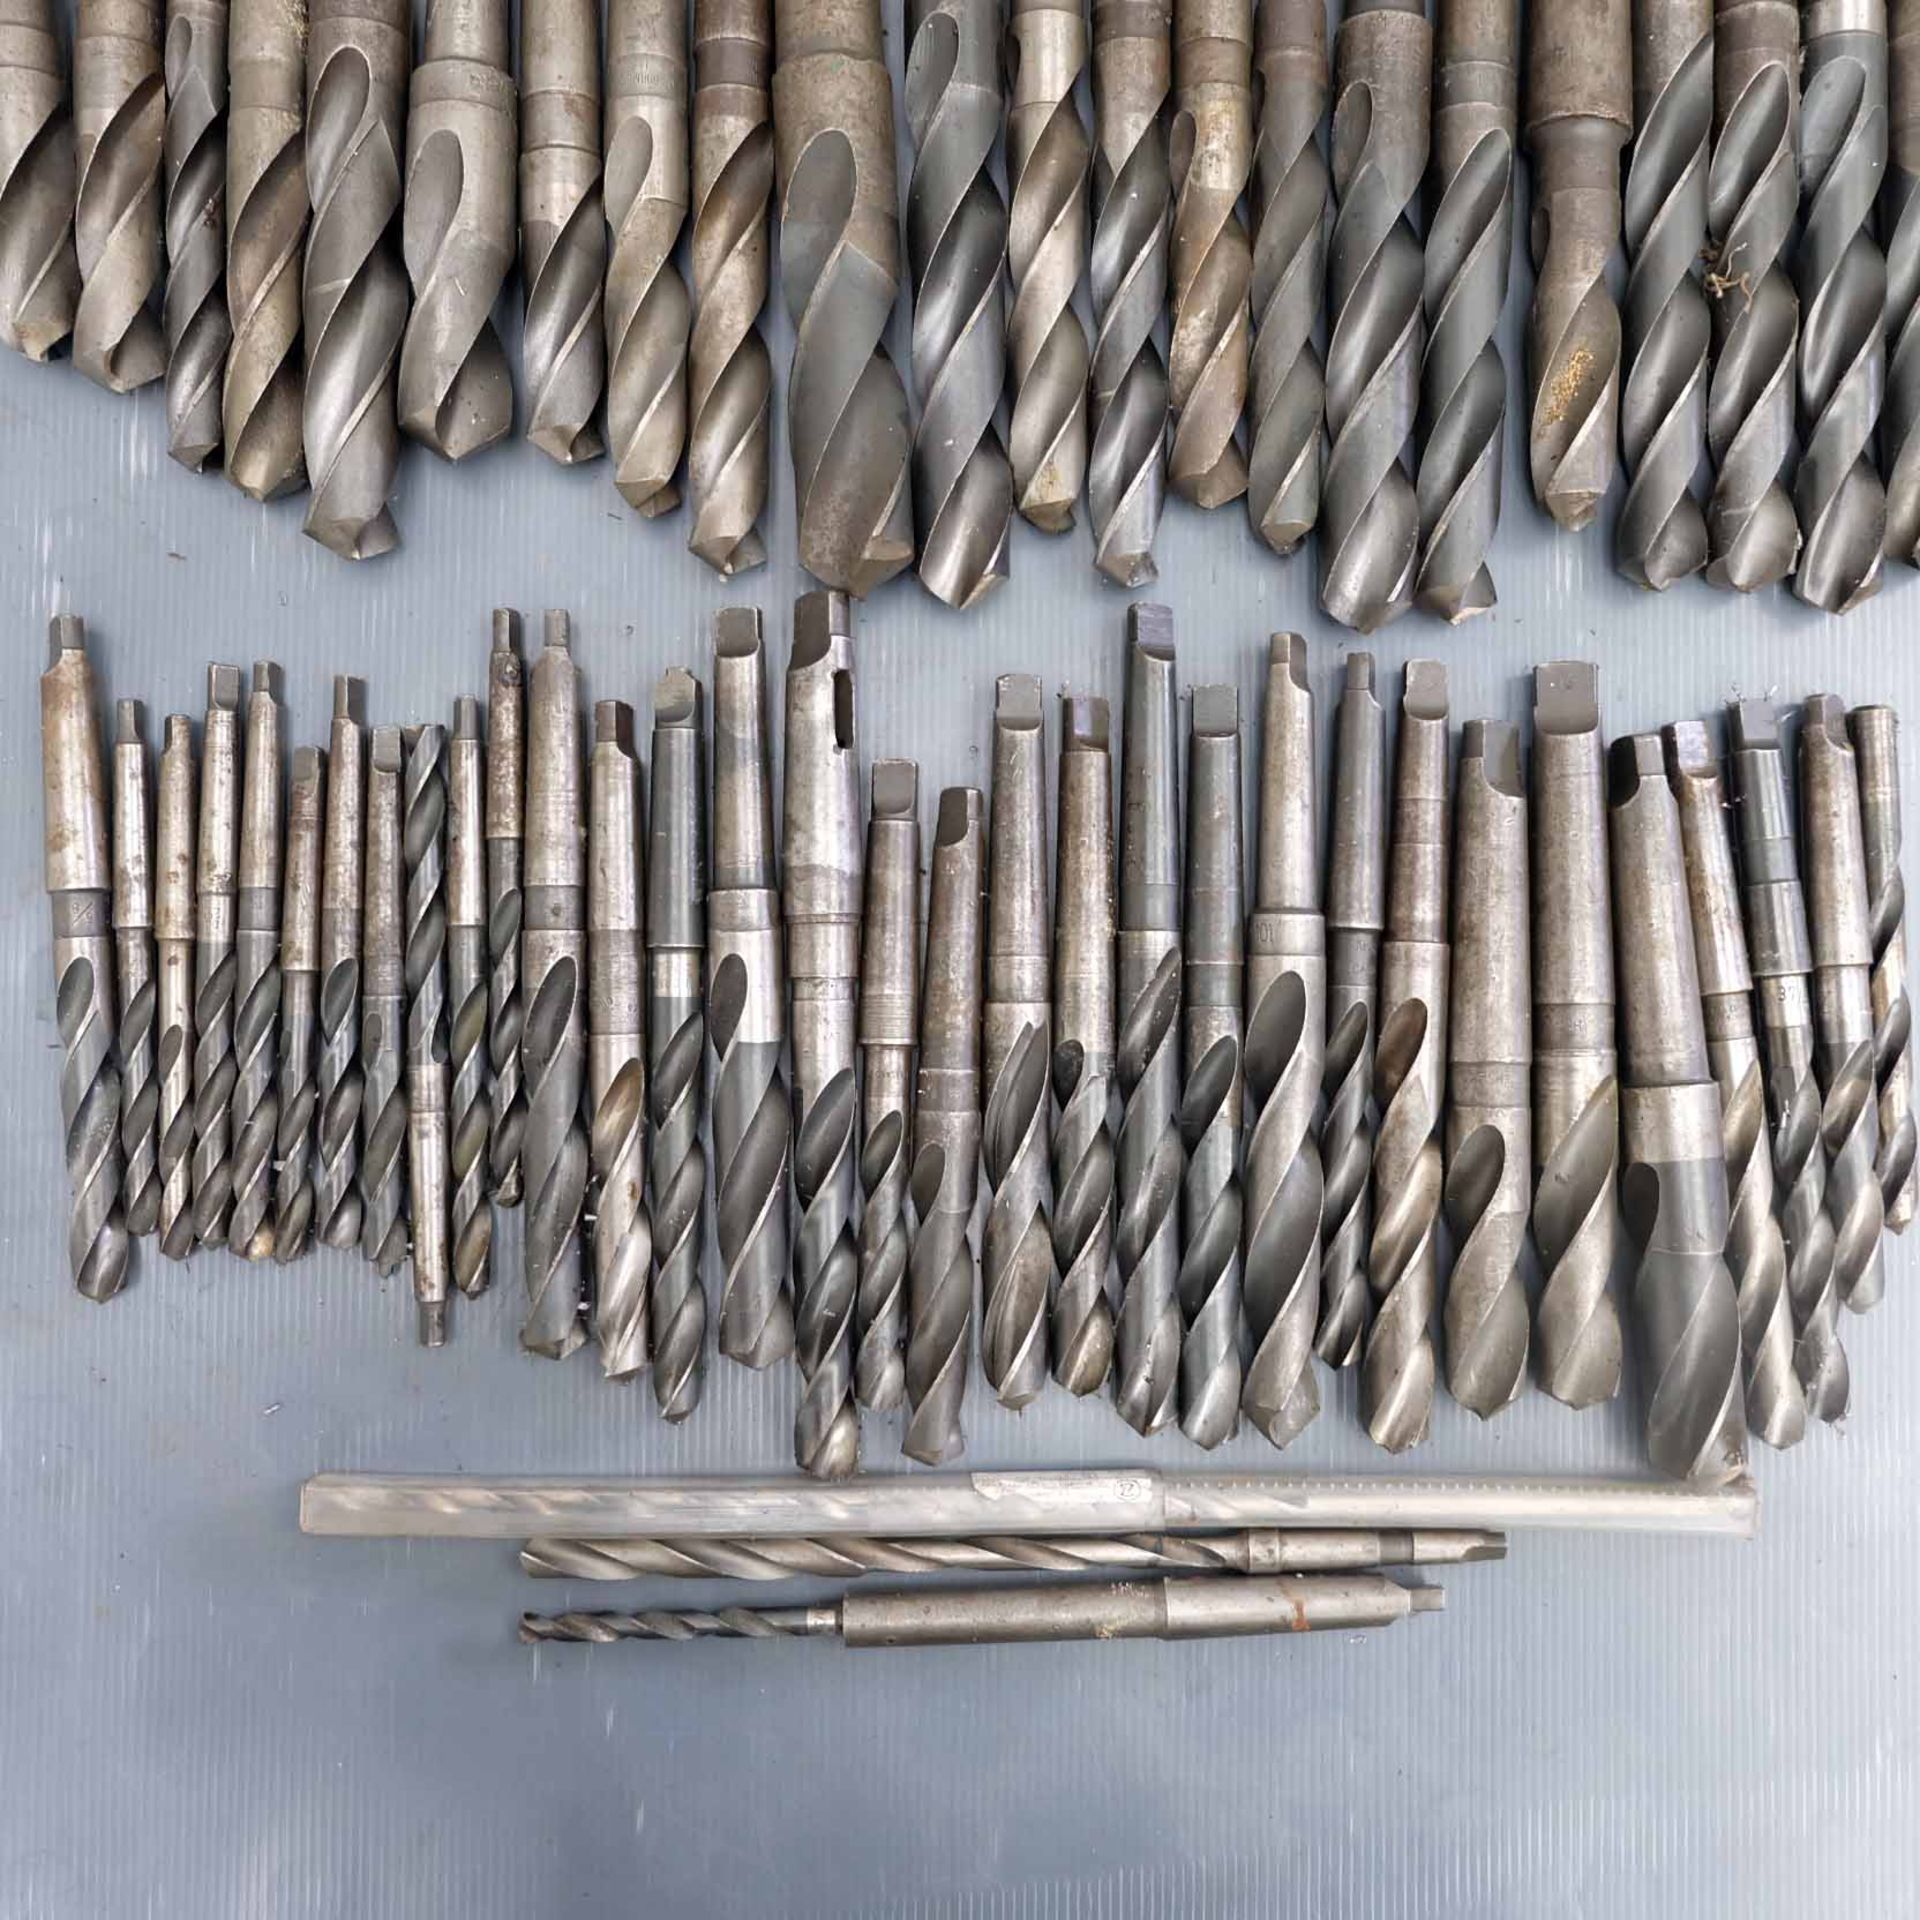 Quantity of Twist Drills. Various Sizes. 1 - 4 MT & Straight Shank. - Image 3 of 3